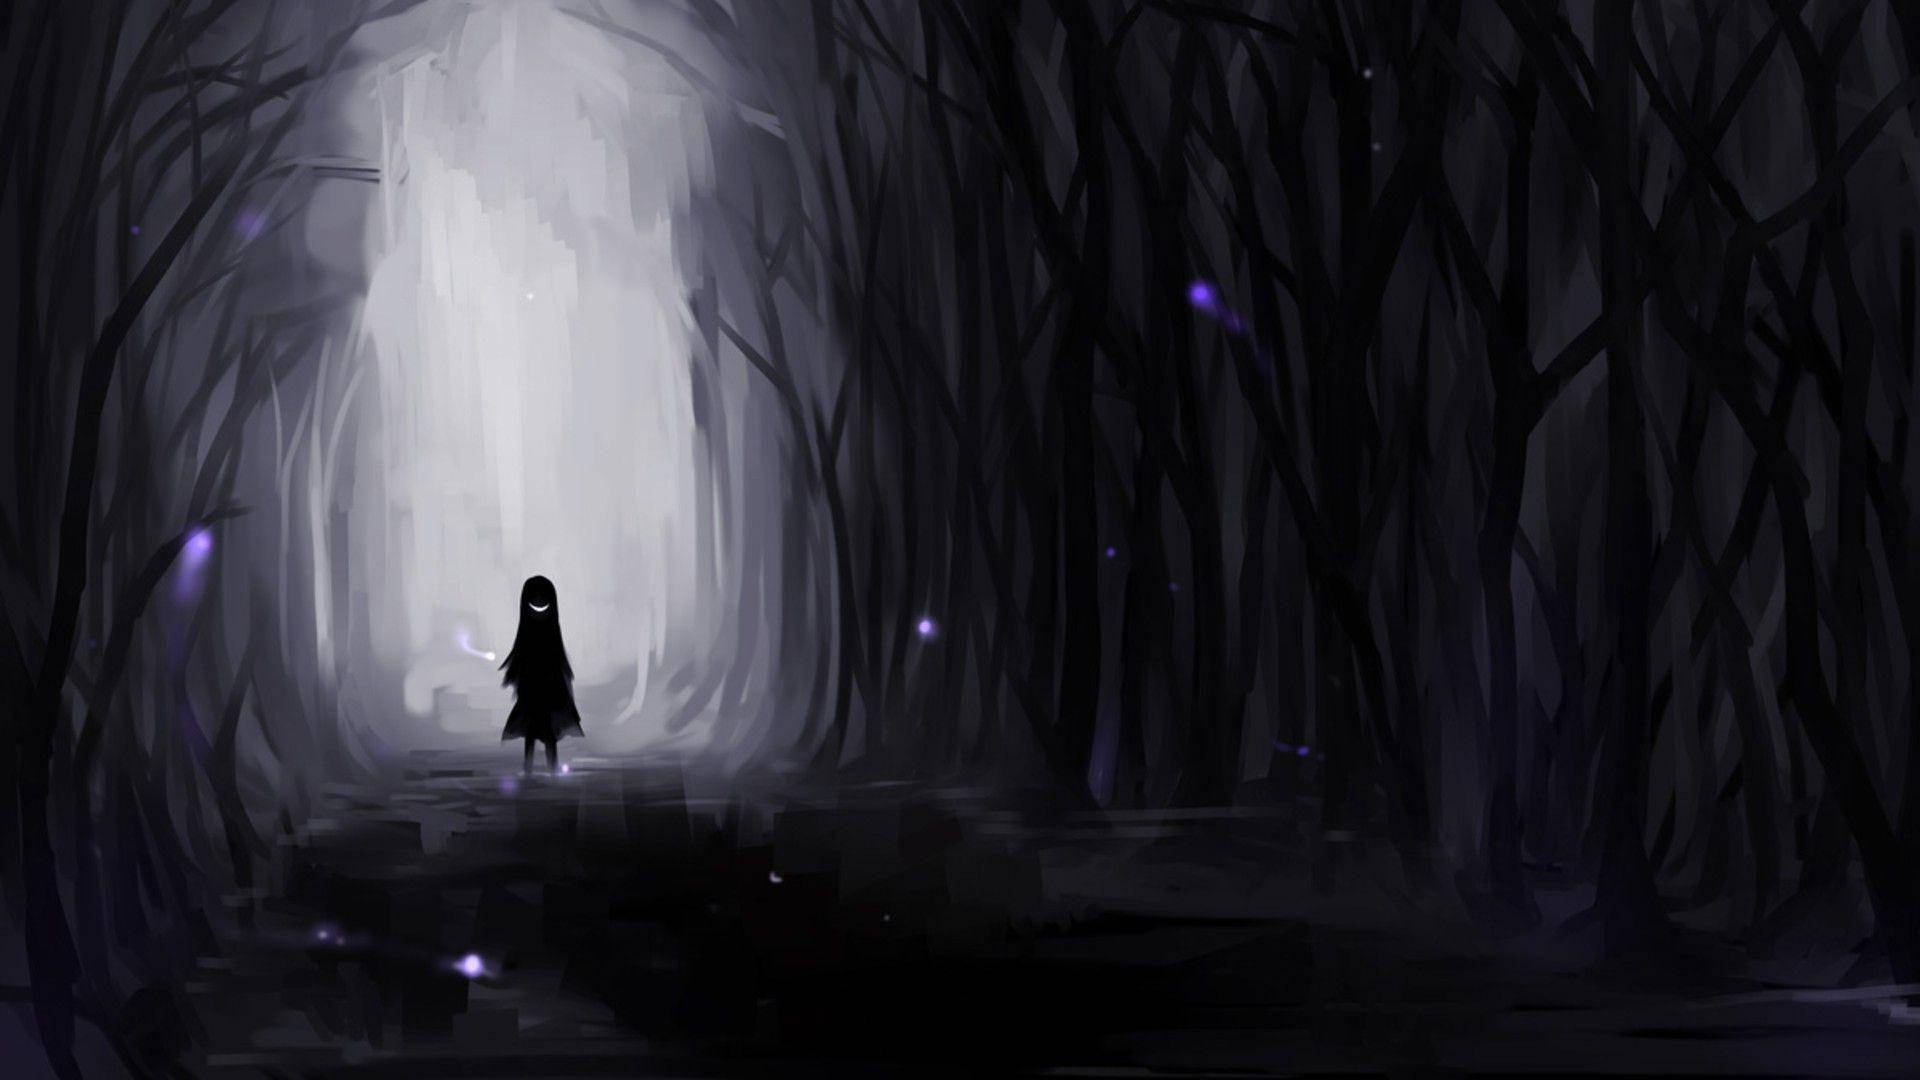 Download Anime Girl Sad Alone Dark Aesthetic Forest Wallpaper | Wallpapers .com